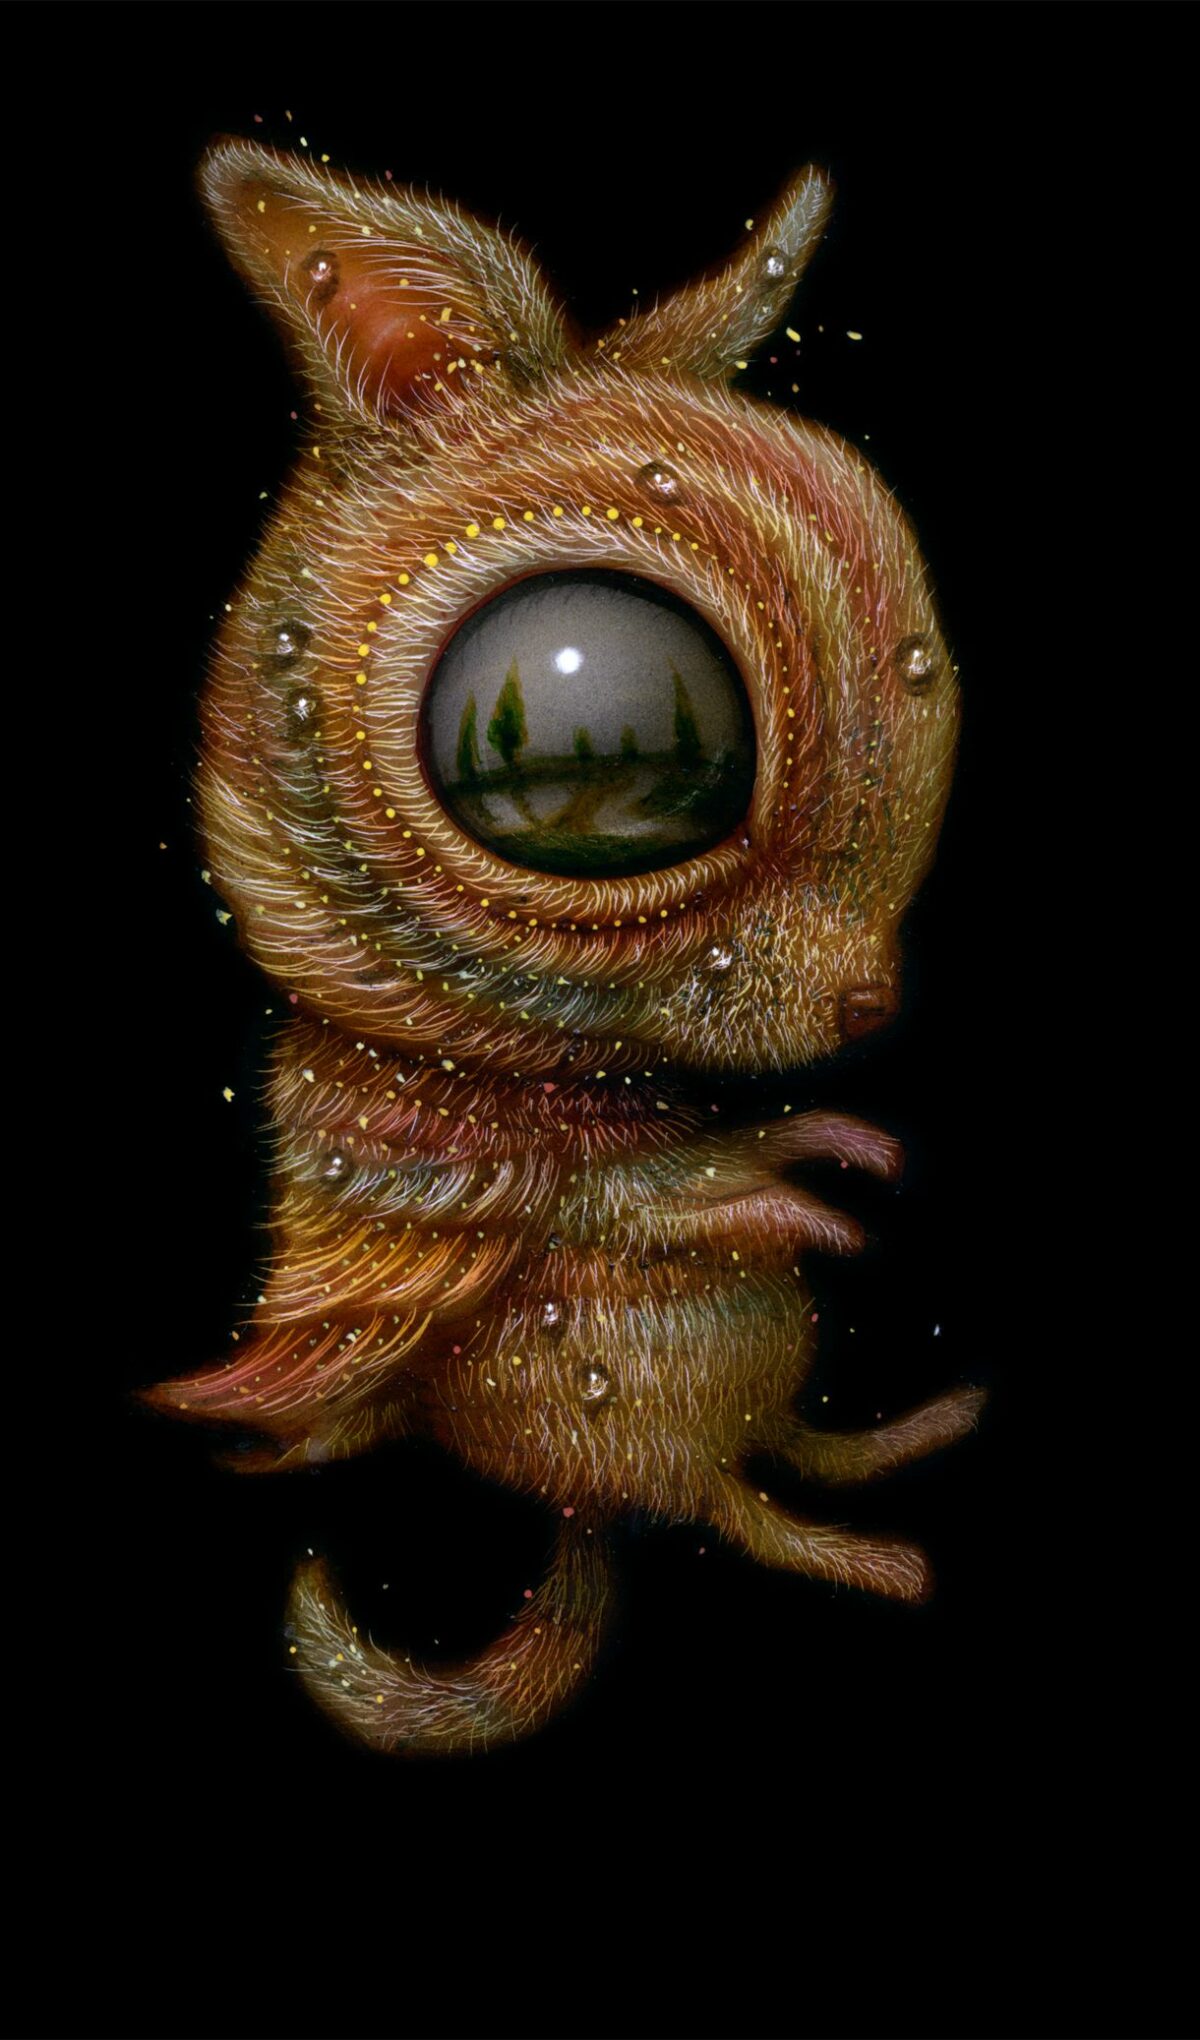 Quirky Fantastical Creatures With Oversized Eyes By Haoto Nattori 13